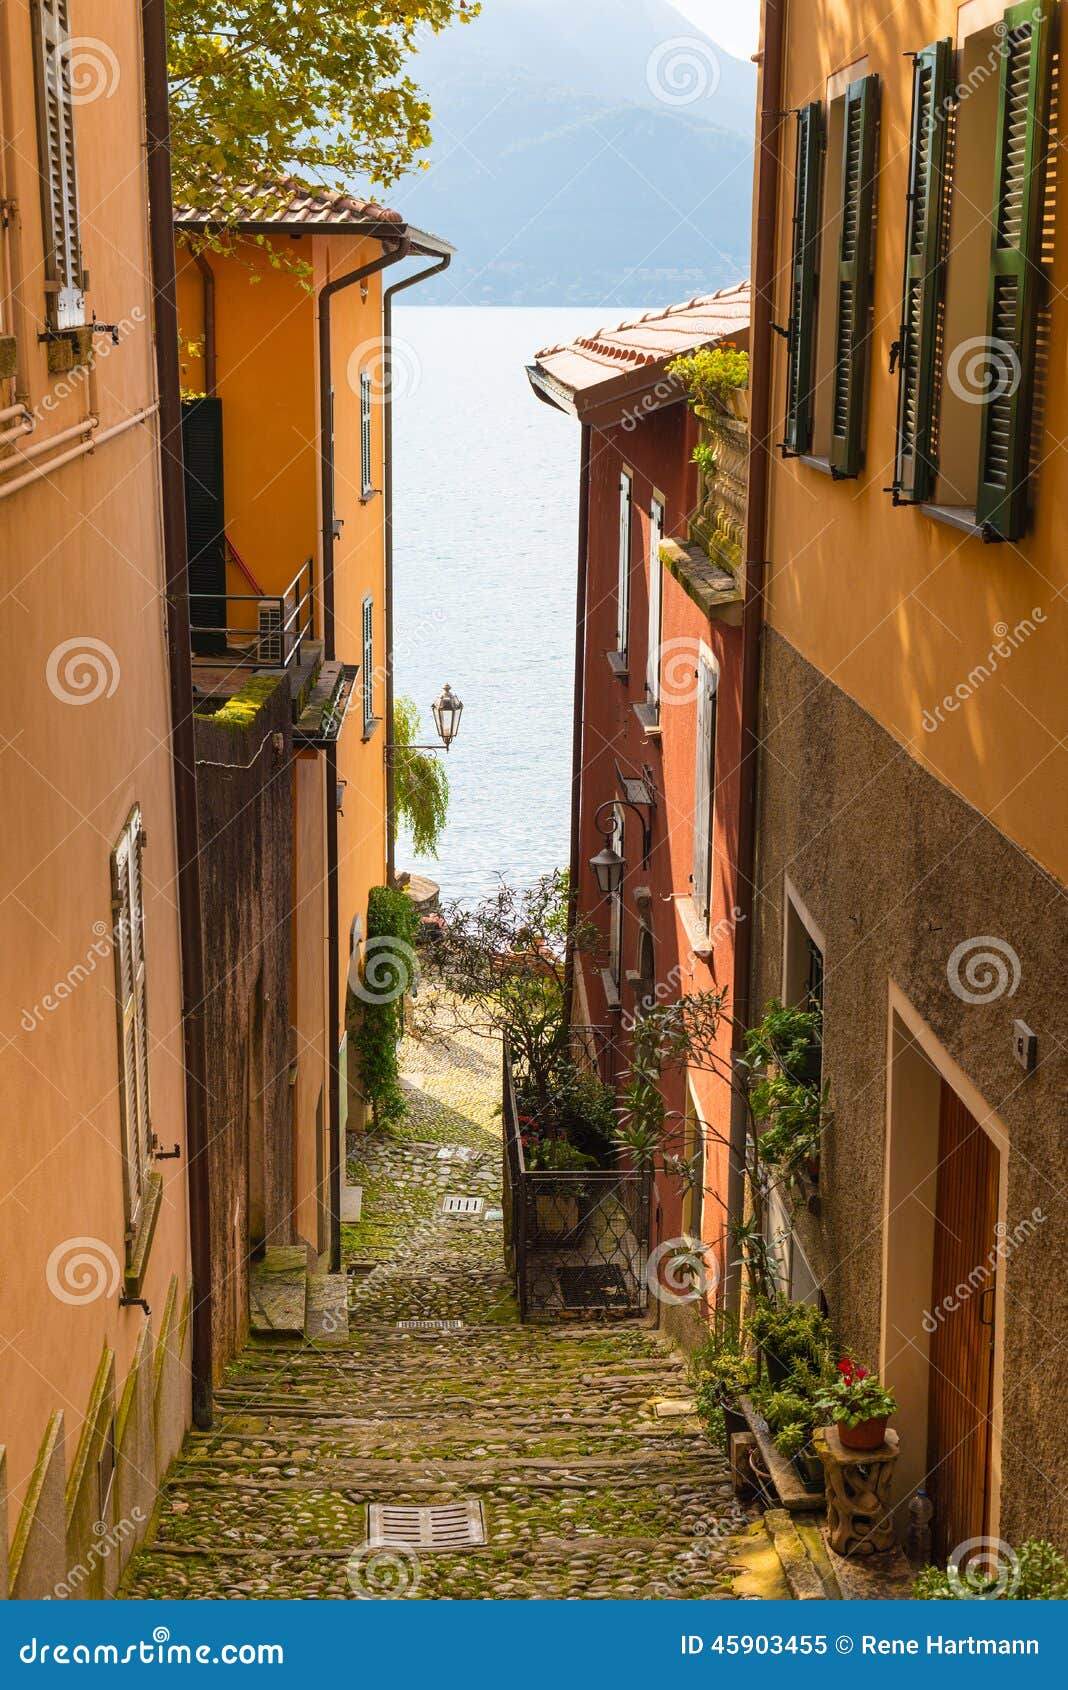 view to the italian lake como from one of the narrow streets.